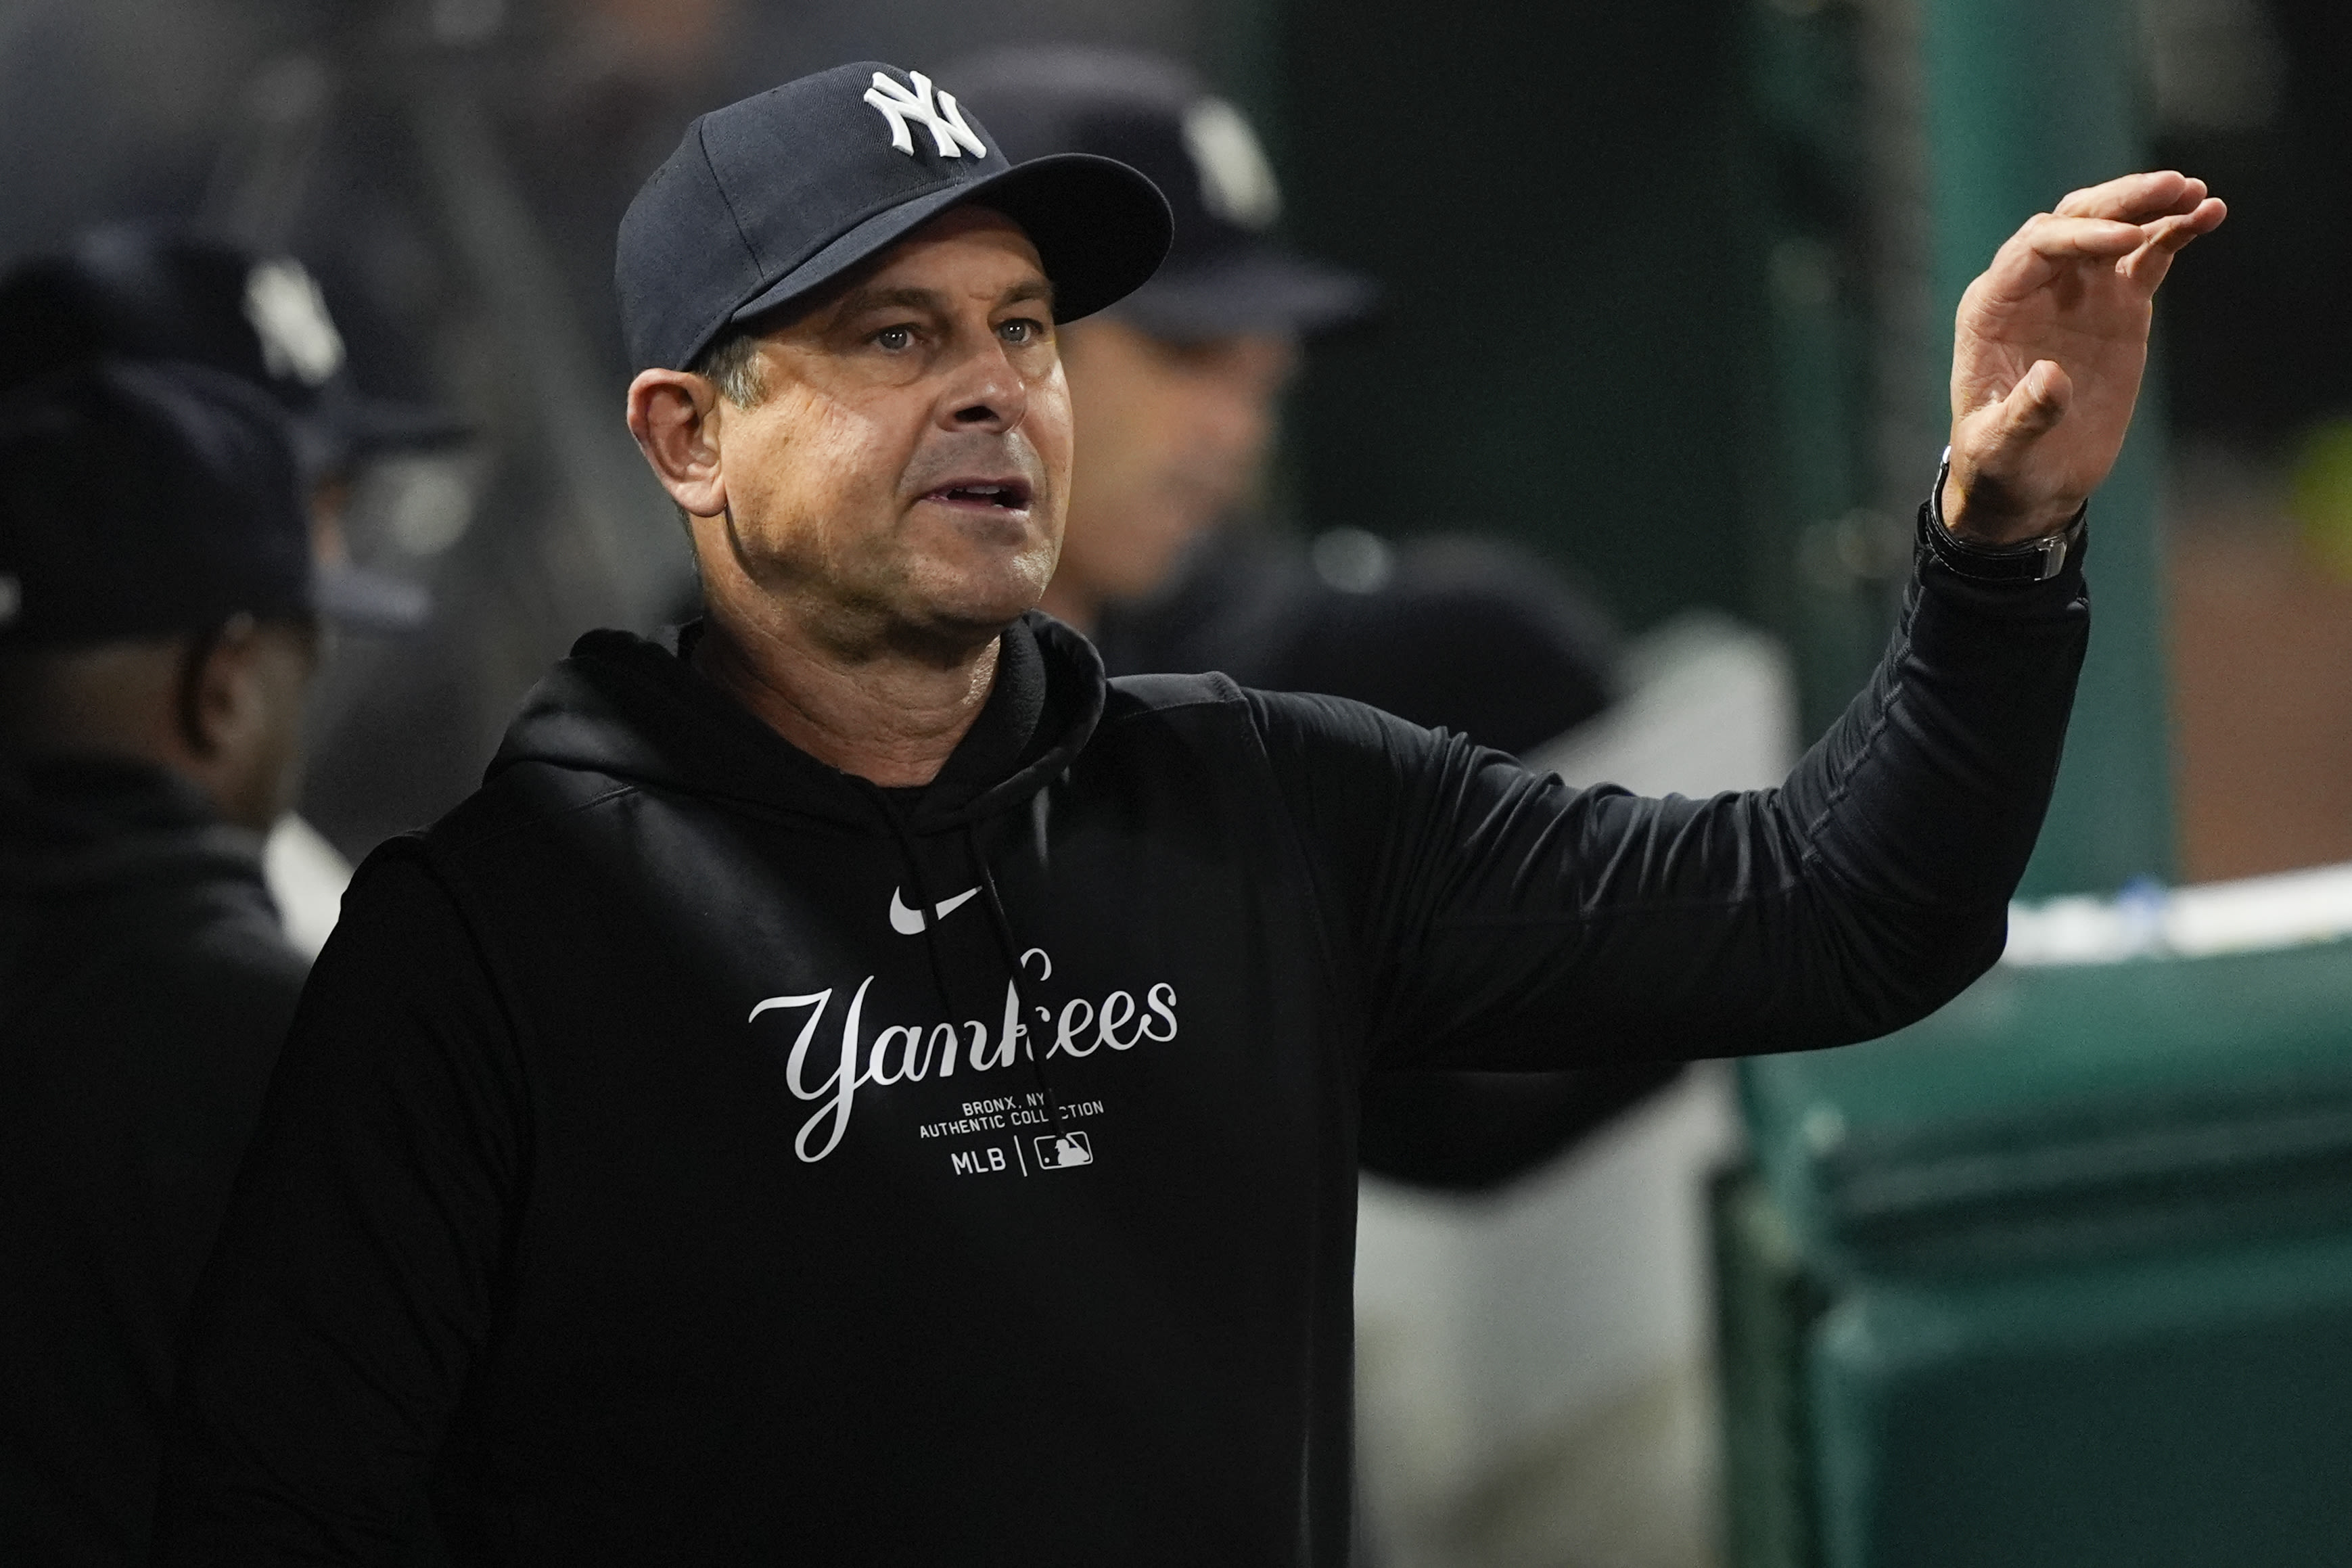 Infield fly and interference call looms large during 1st inning of Yankees-Angels game